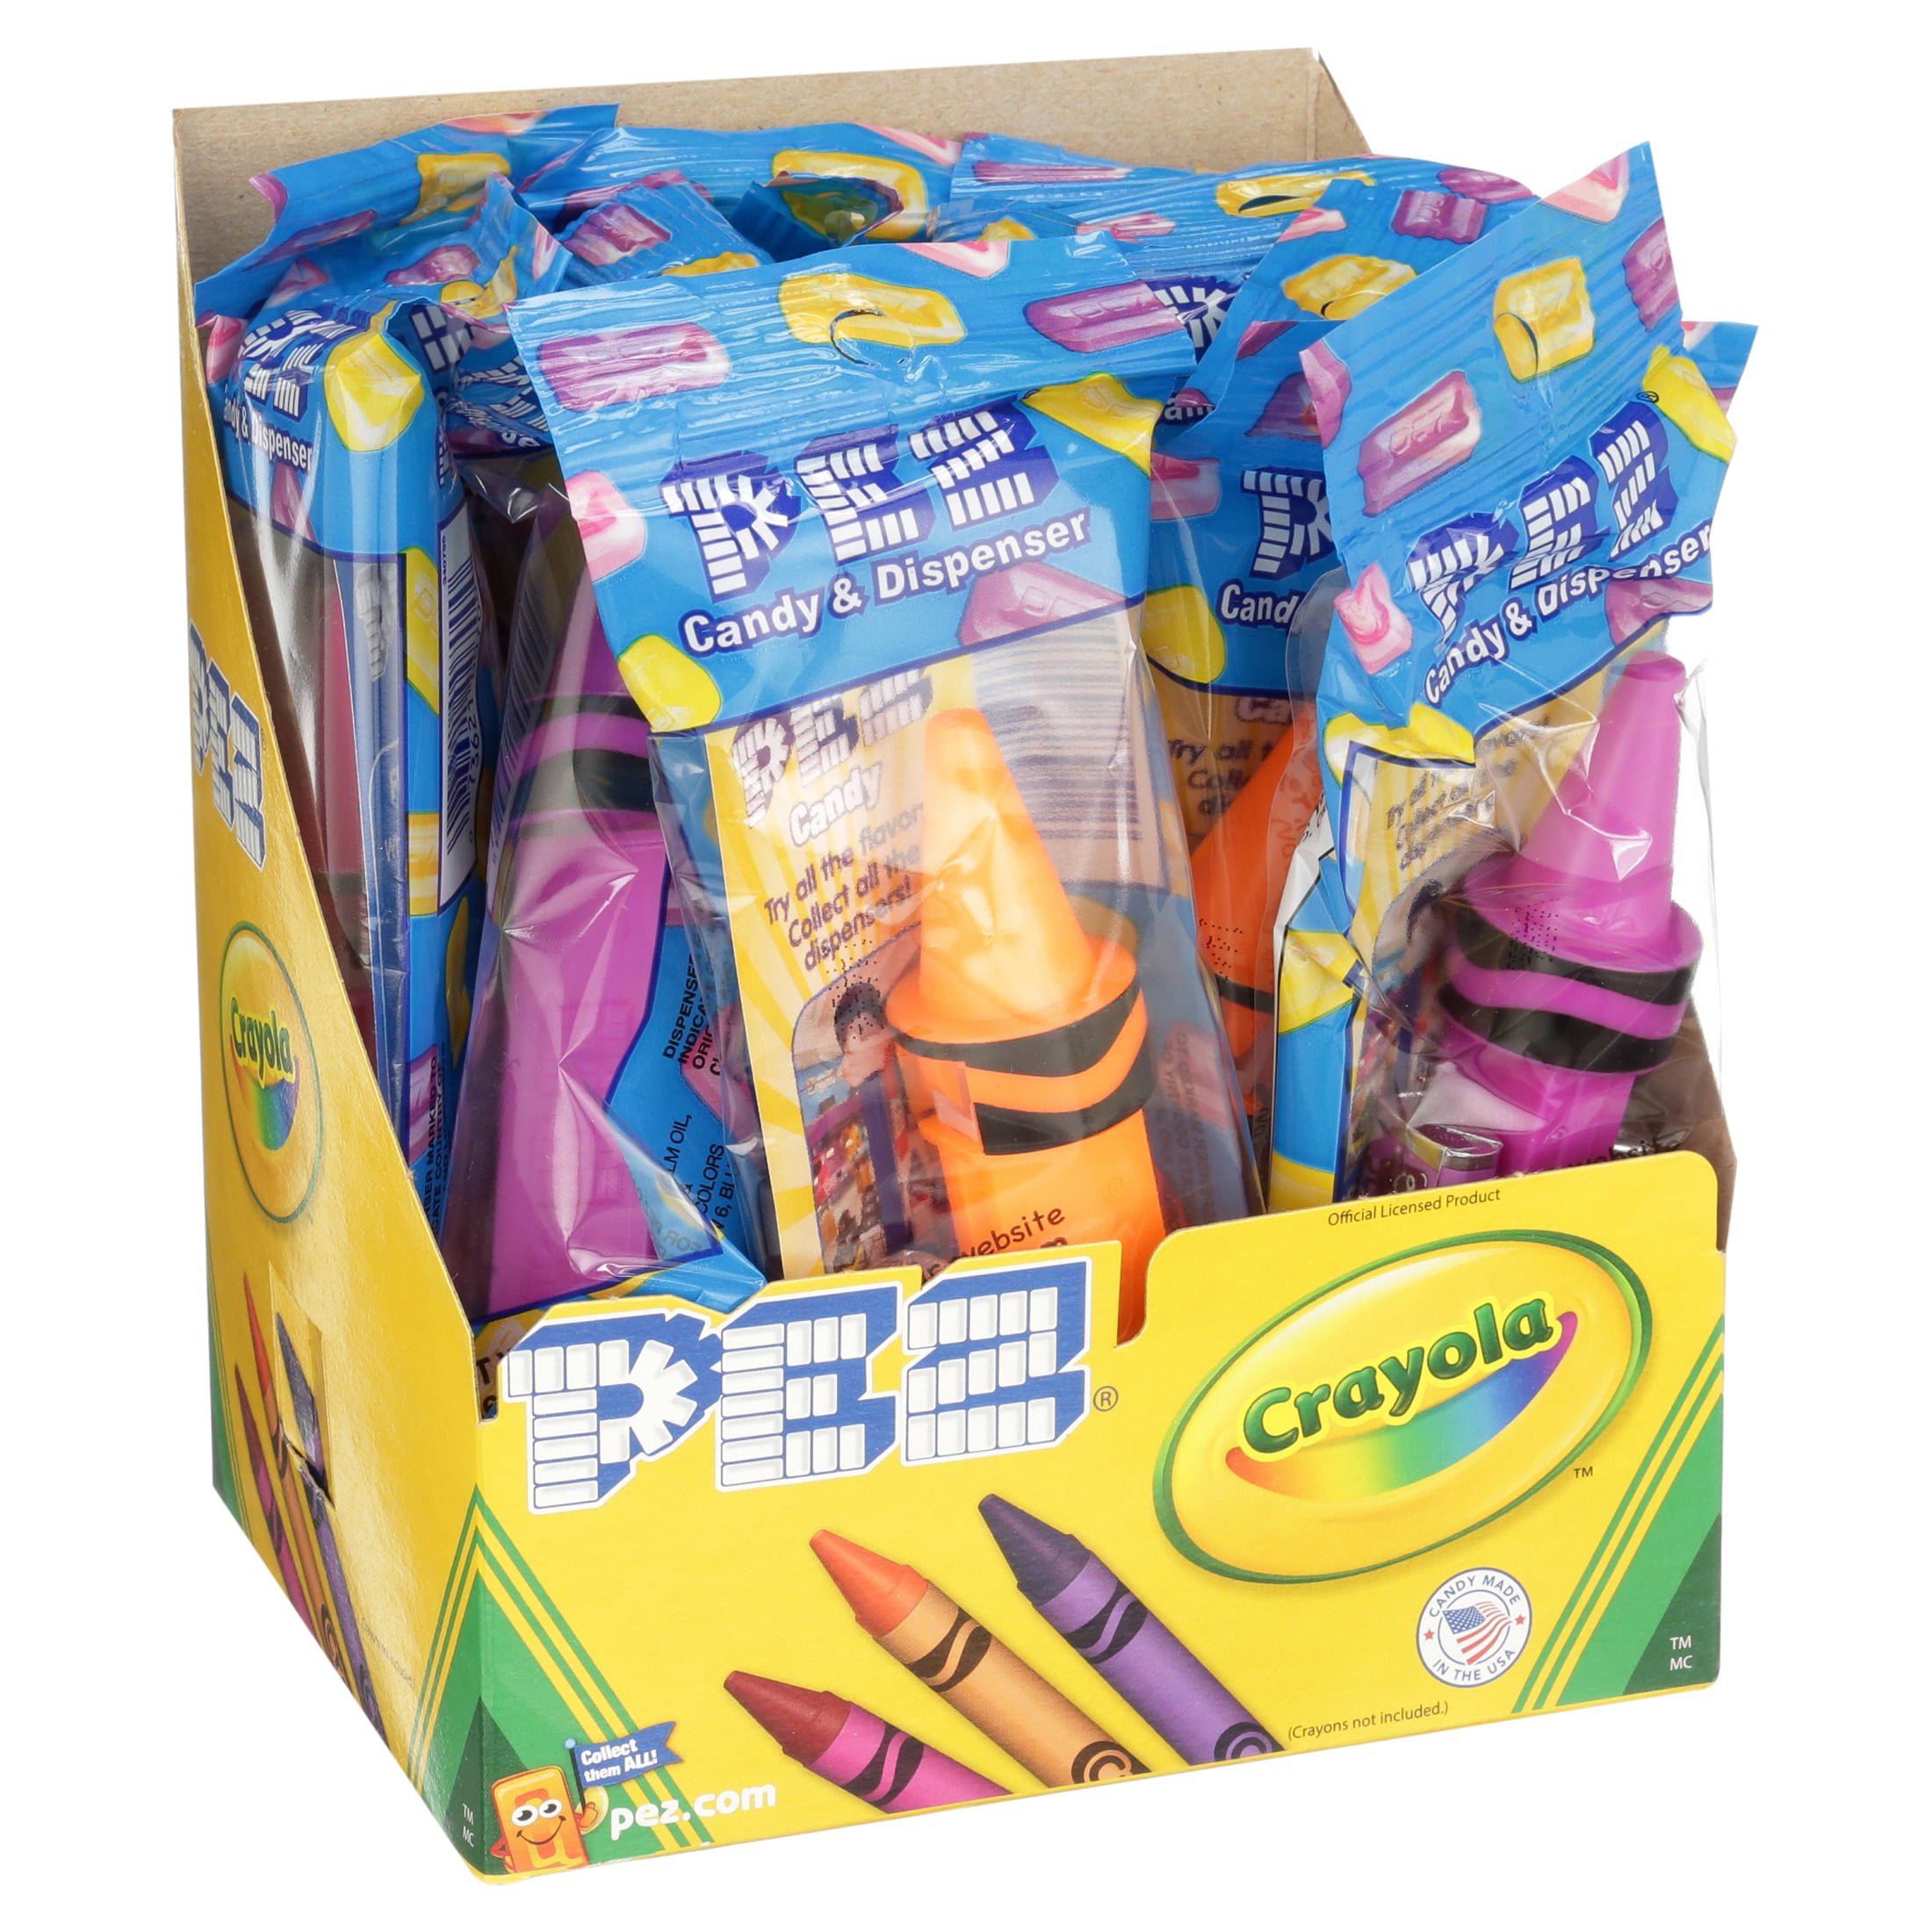 8 packs candy and more PEZ Crayola Gift box,4 colors crayola PEZ dispensers 